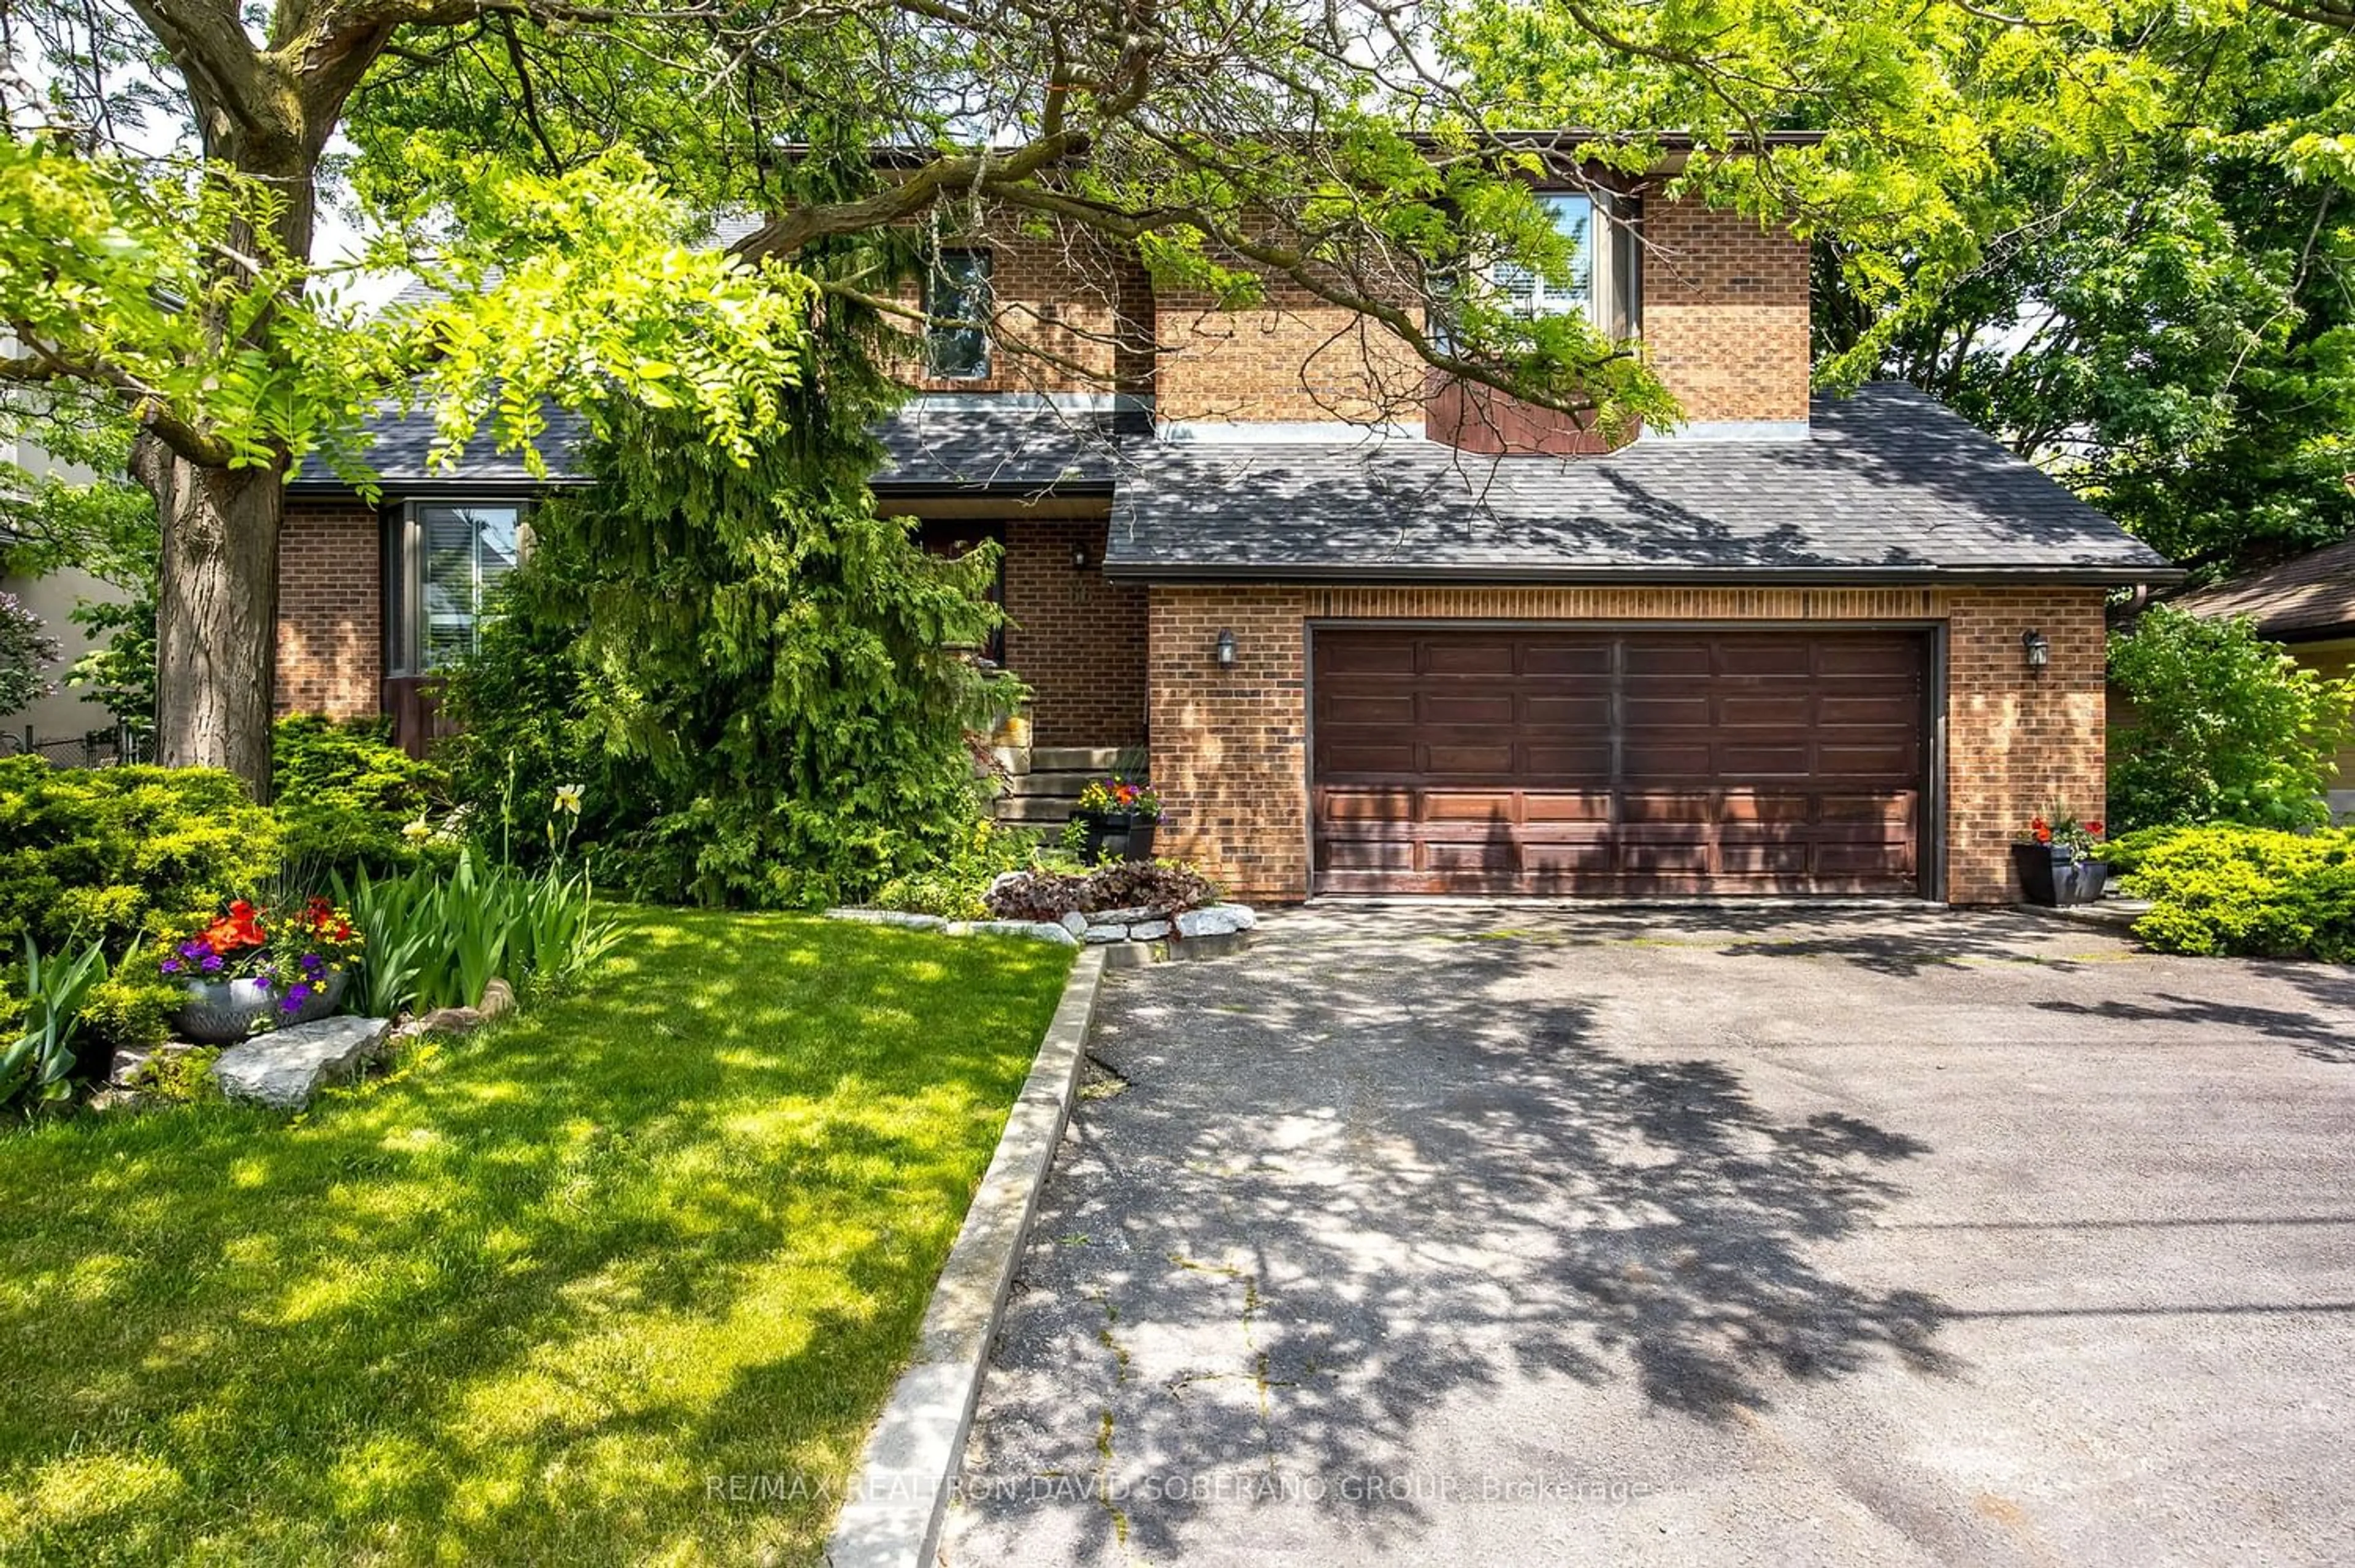 Home with brick exterior material for 66 Reiner Rd, Toronto Ontario M3H 2L5